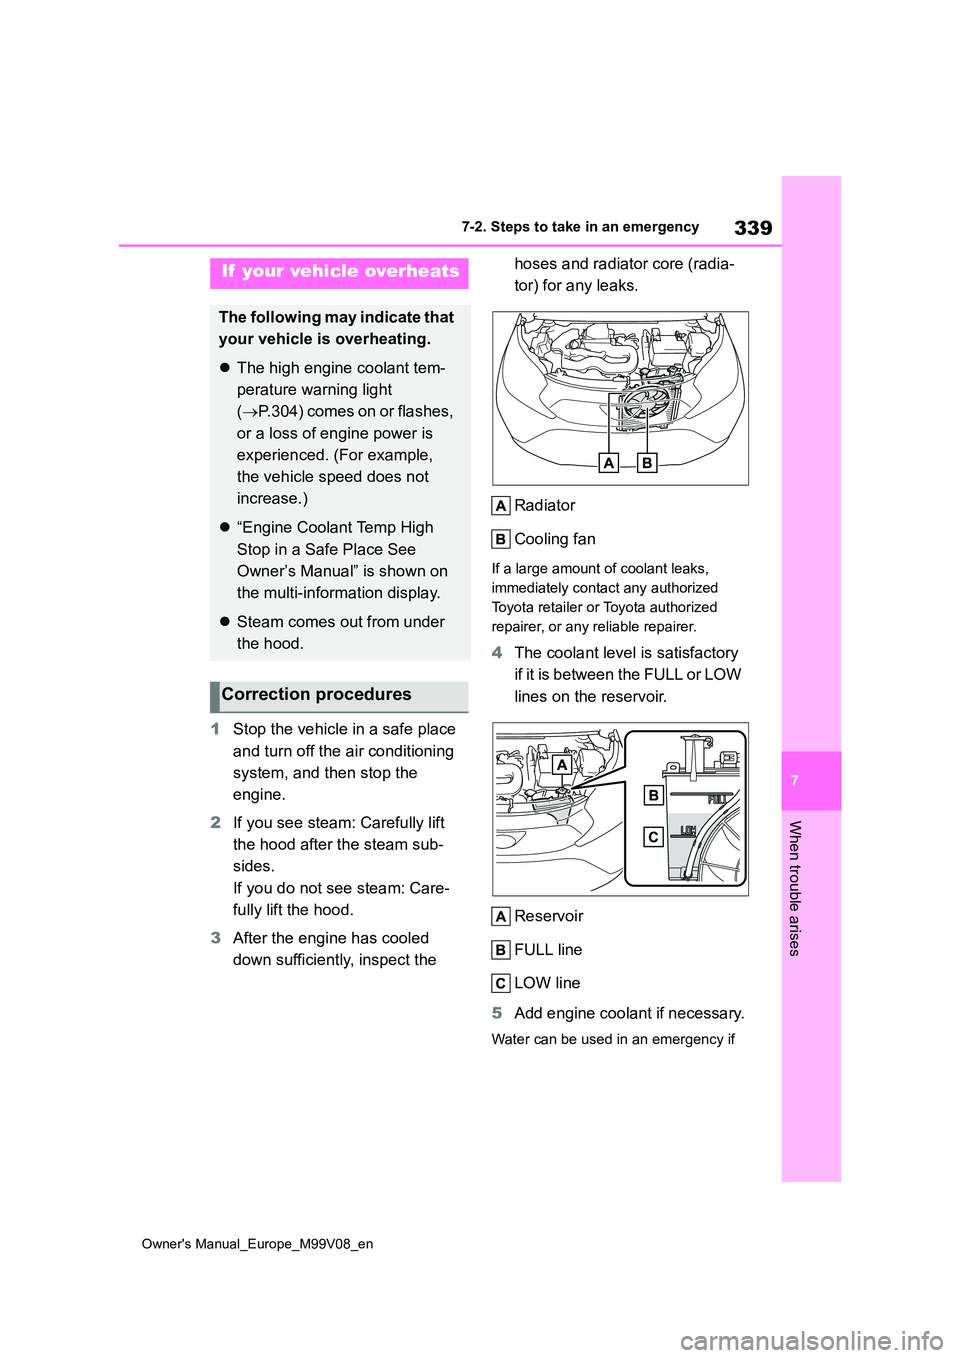 TOYOTA AYGO X 2022  Owners Manual (in English) 339
7
Owner's Manual_Europe_M99V08_en
7-2. Steps to take in an emergency
When trouble arises
1Stop the vehicle in a safe place  
and turn off the air conditioning  
system, and then stop the  
eng